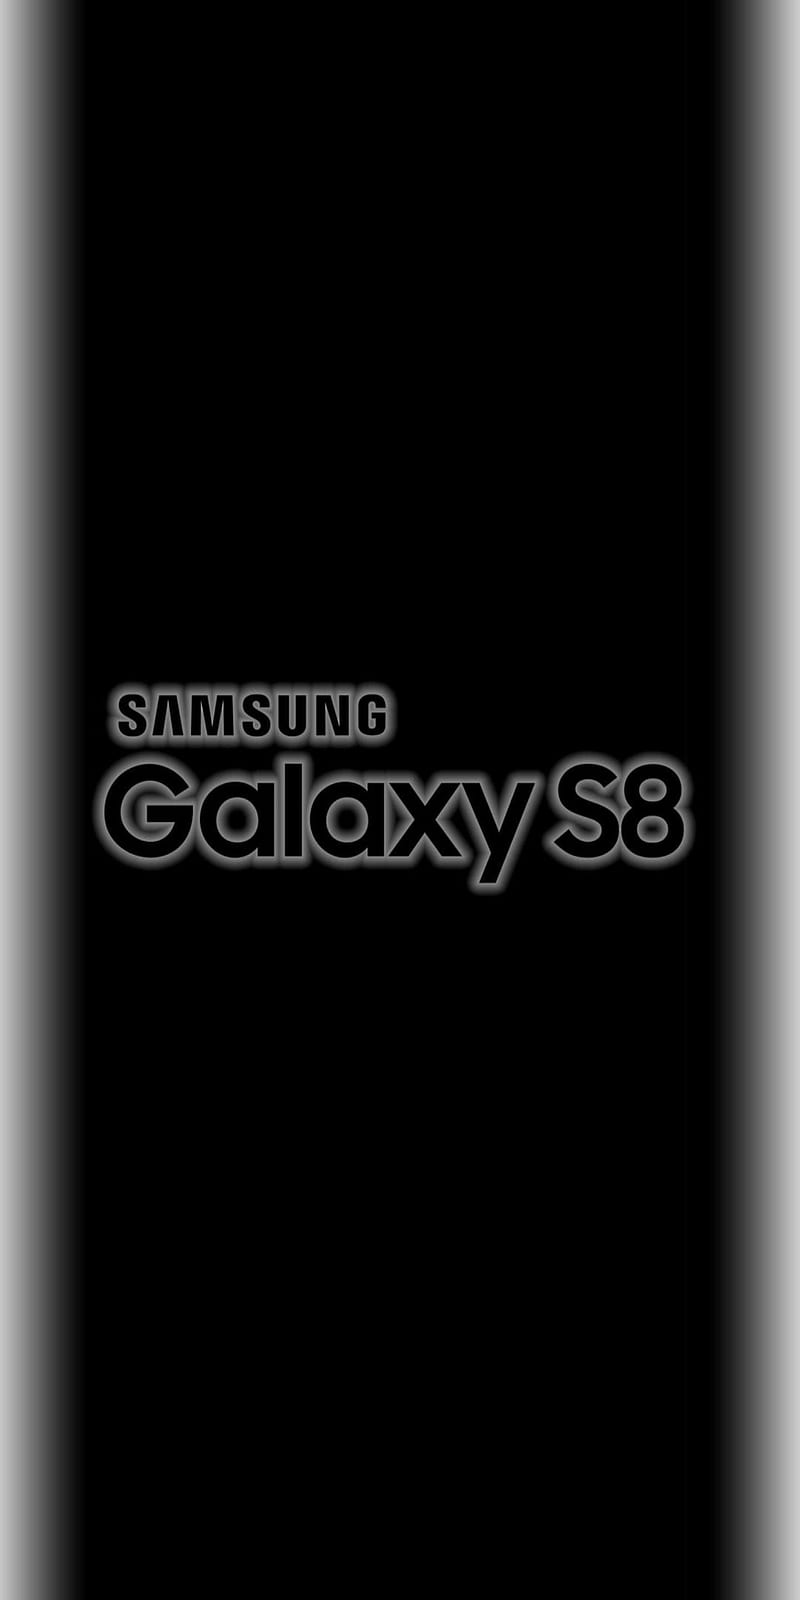 Galaxy S8 and S8 wallpapers  Beautiful Infinity Display wallpapers that  are a perfect fit for the Samsung   Night sky wallpaper Night skies  Mountain wallpaper